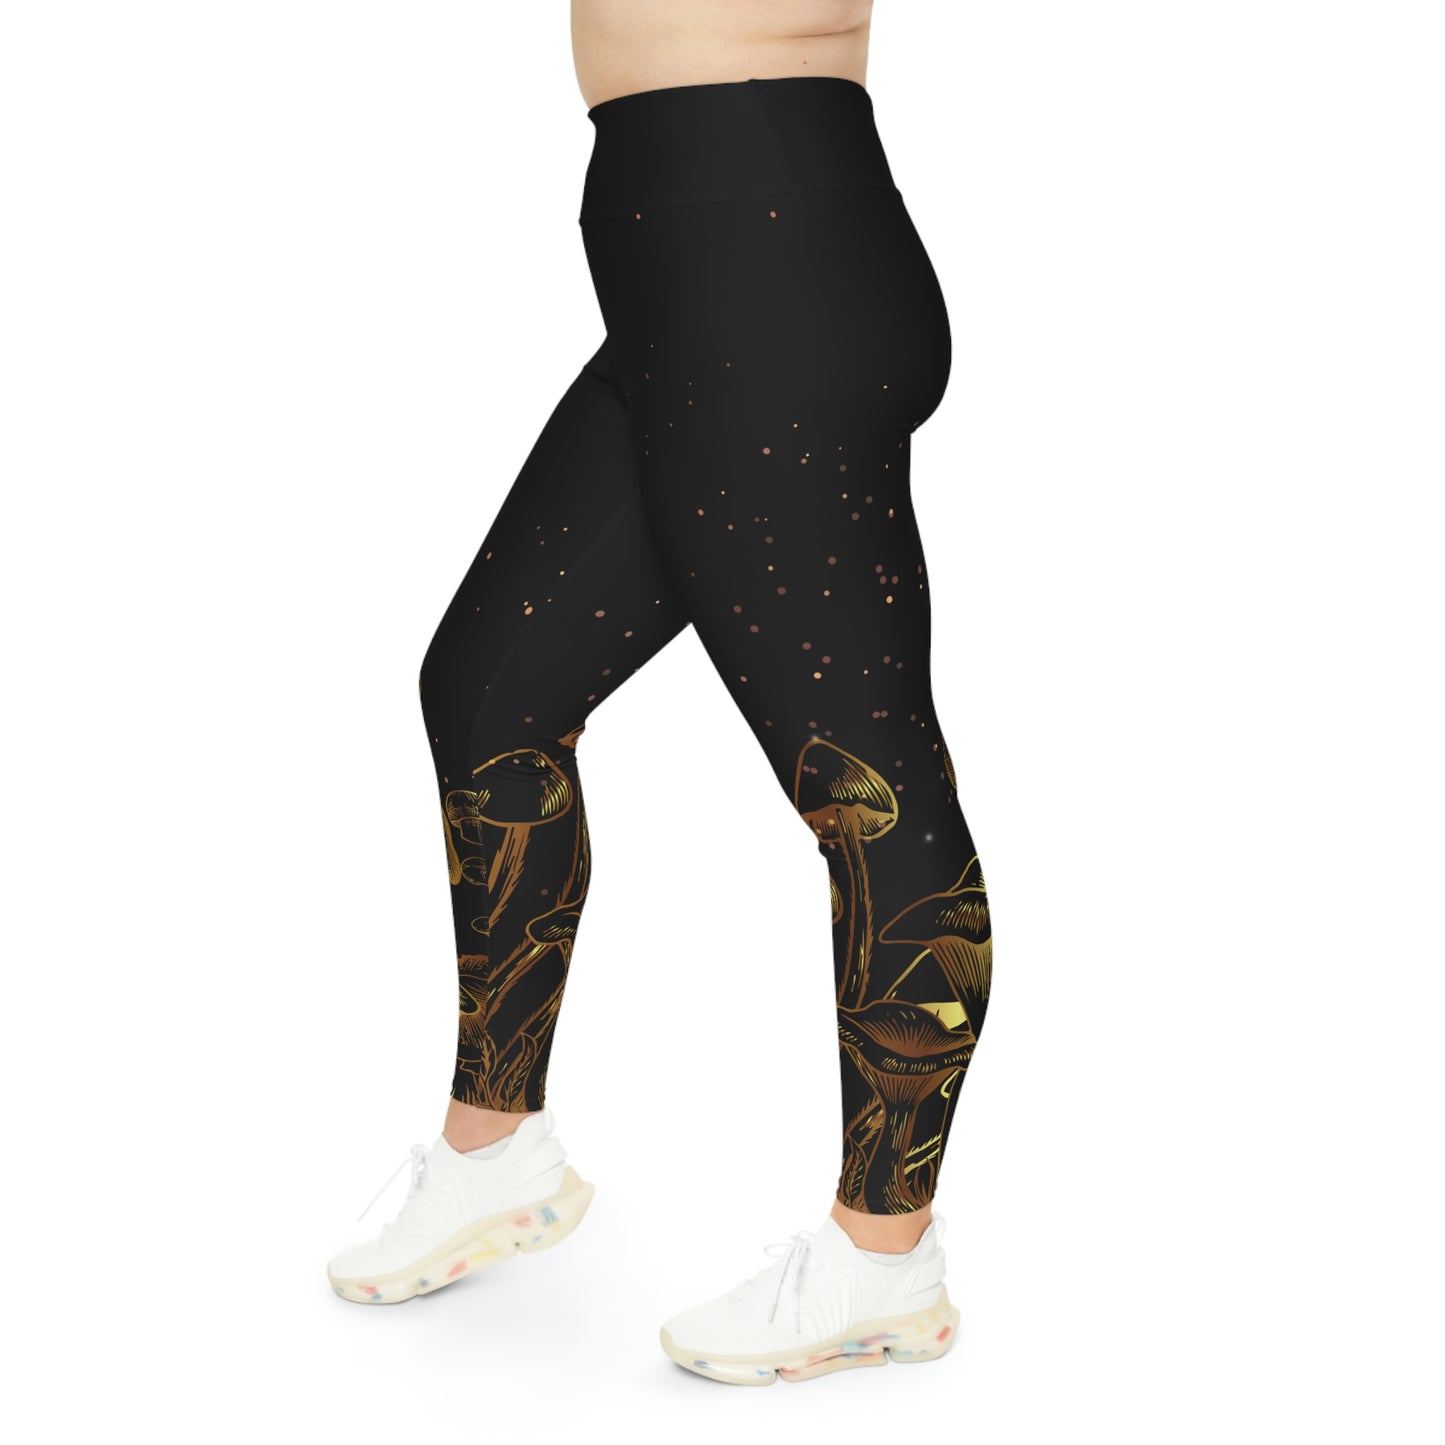 Magic Mushrooms cottagecore, Psychedelic Plus Size Leggings One of a Kind Workout Activewear for Wife, Best Friend,  Christmas Gift mom tights